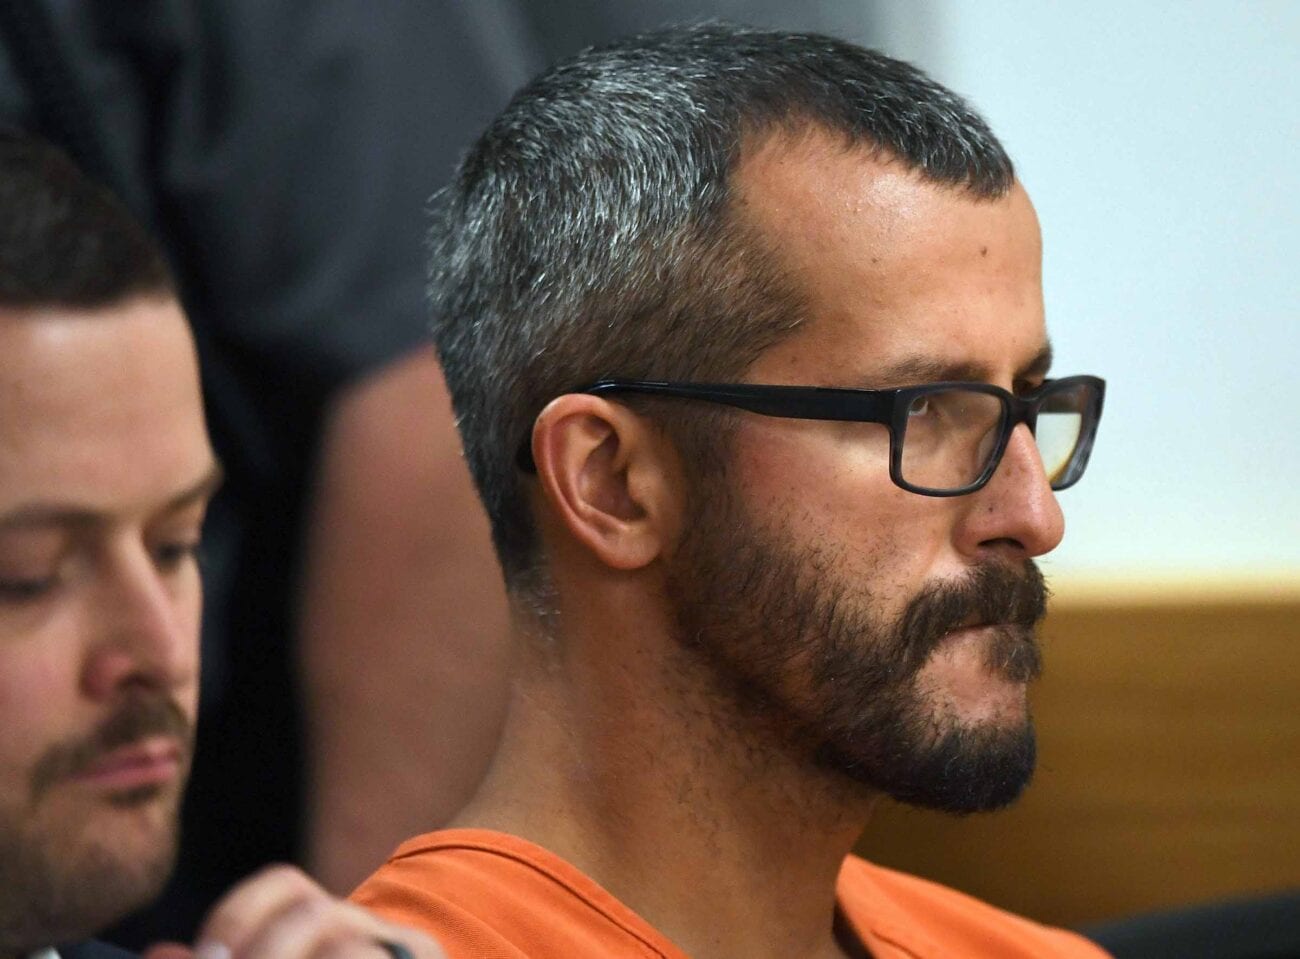 Five life sentences seems like a lot, but it's exactly what Chris Watts deserves after murdering his pregnant wife and two daughters.